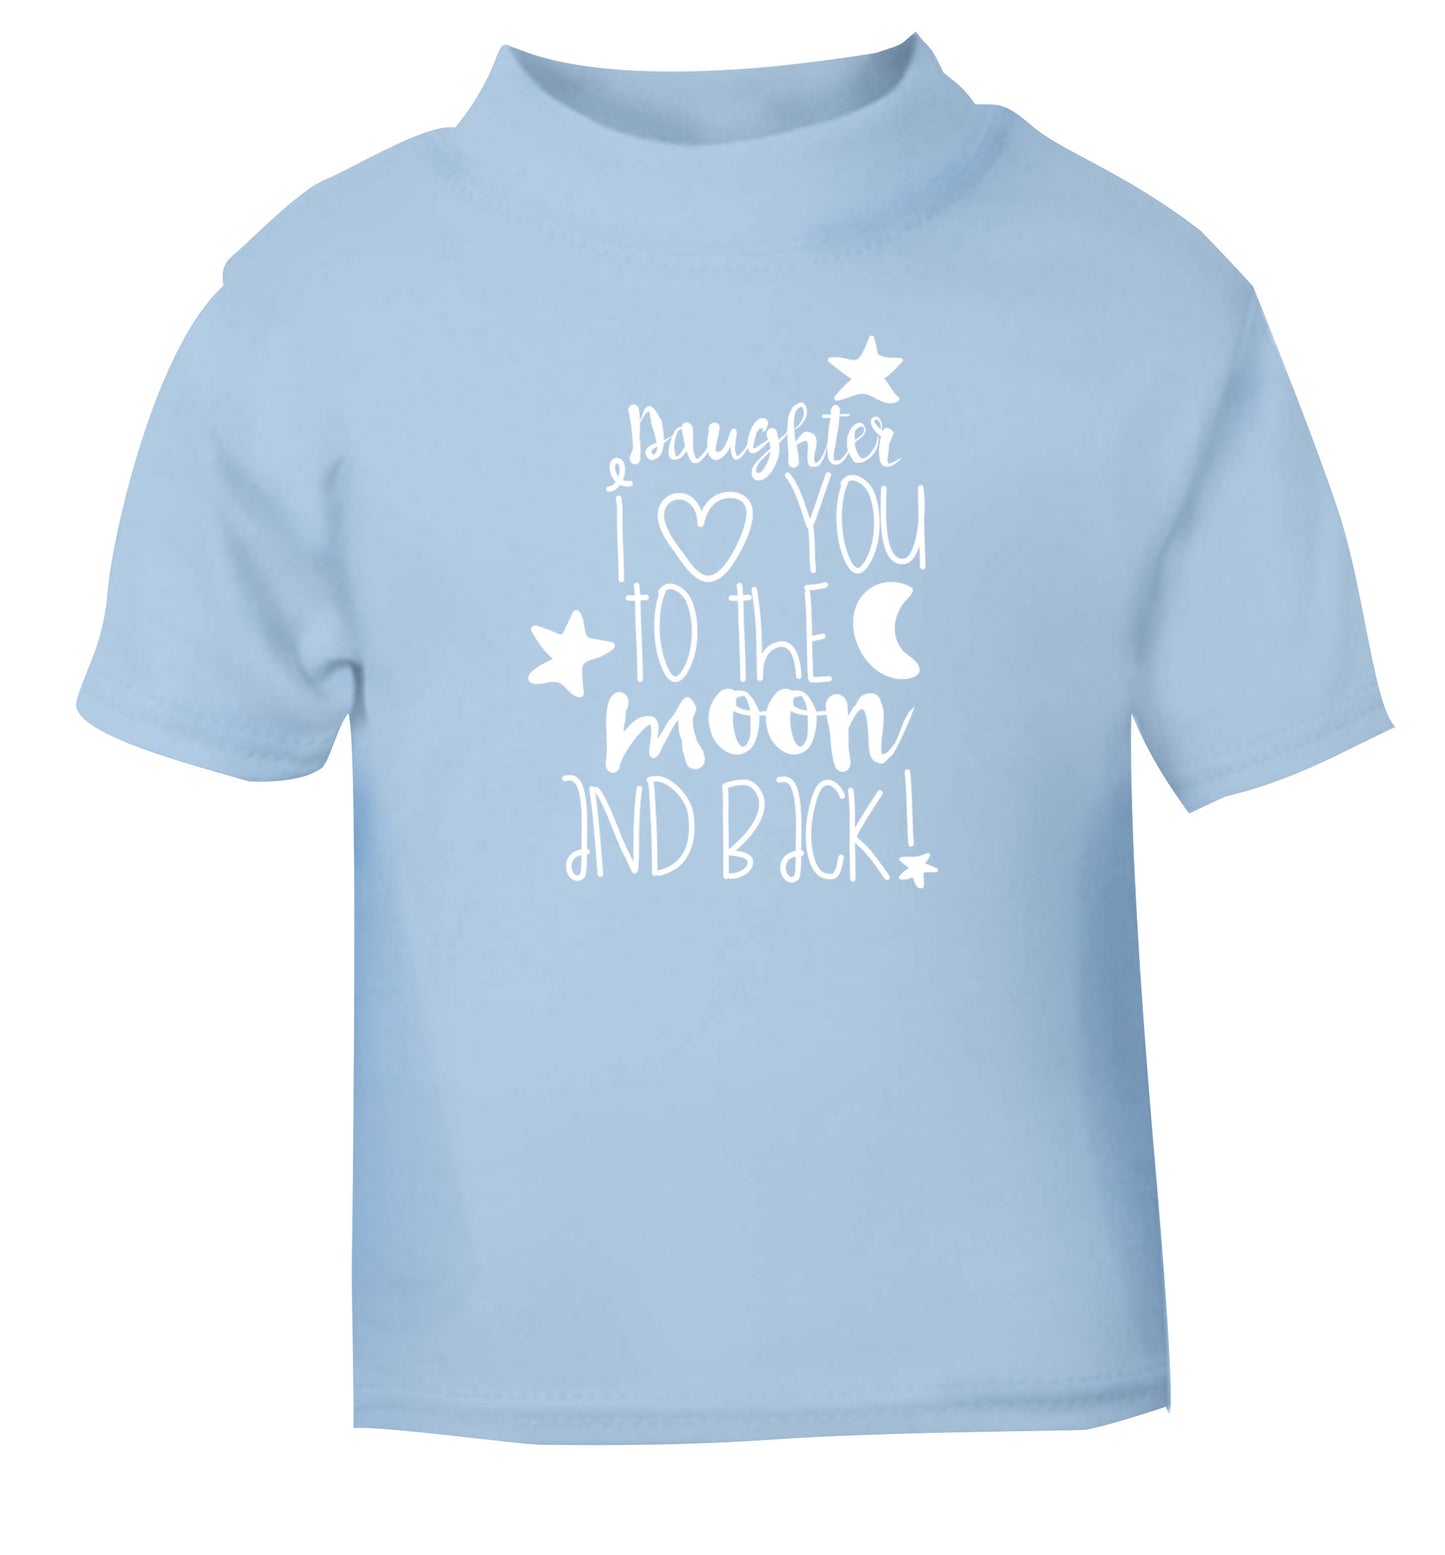 Daughter I love you to the moon and back light blue Baby Toddler Tshirt 2 Years